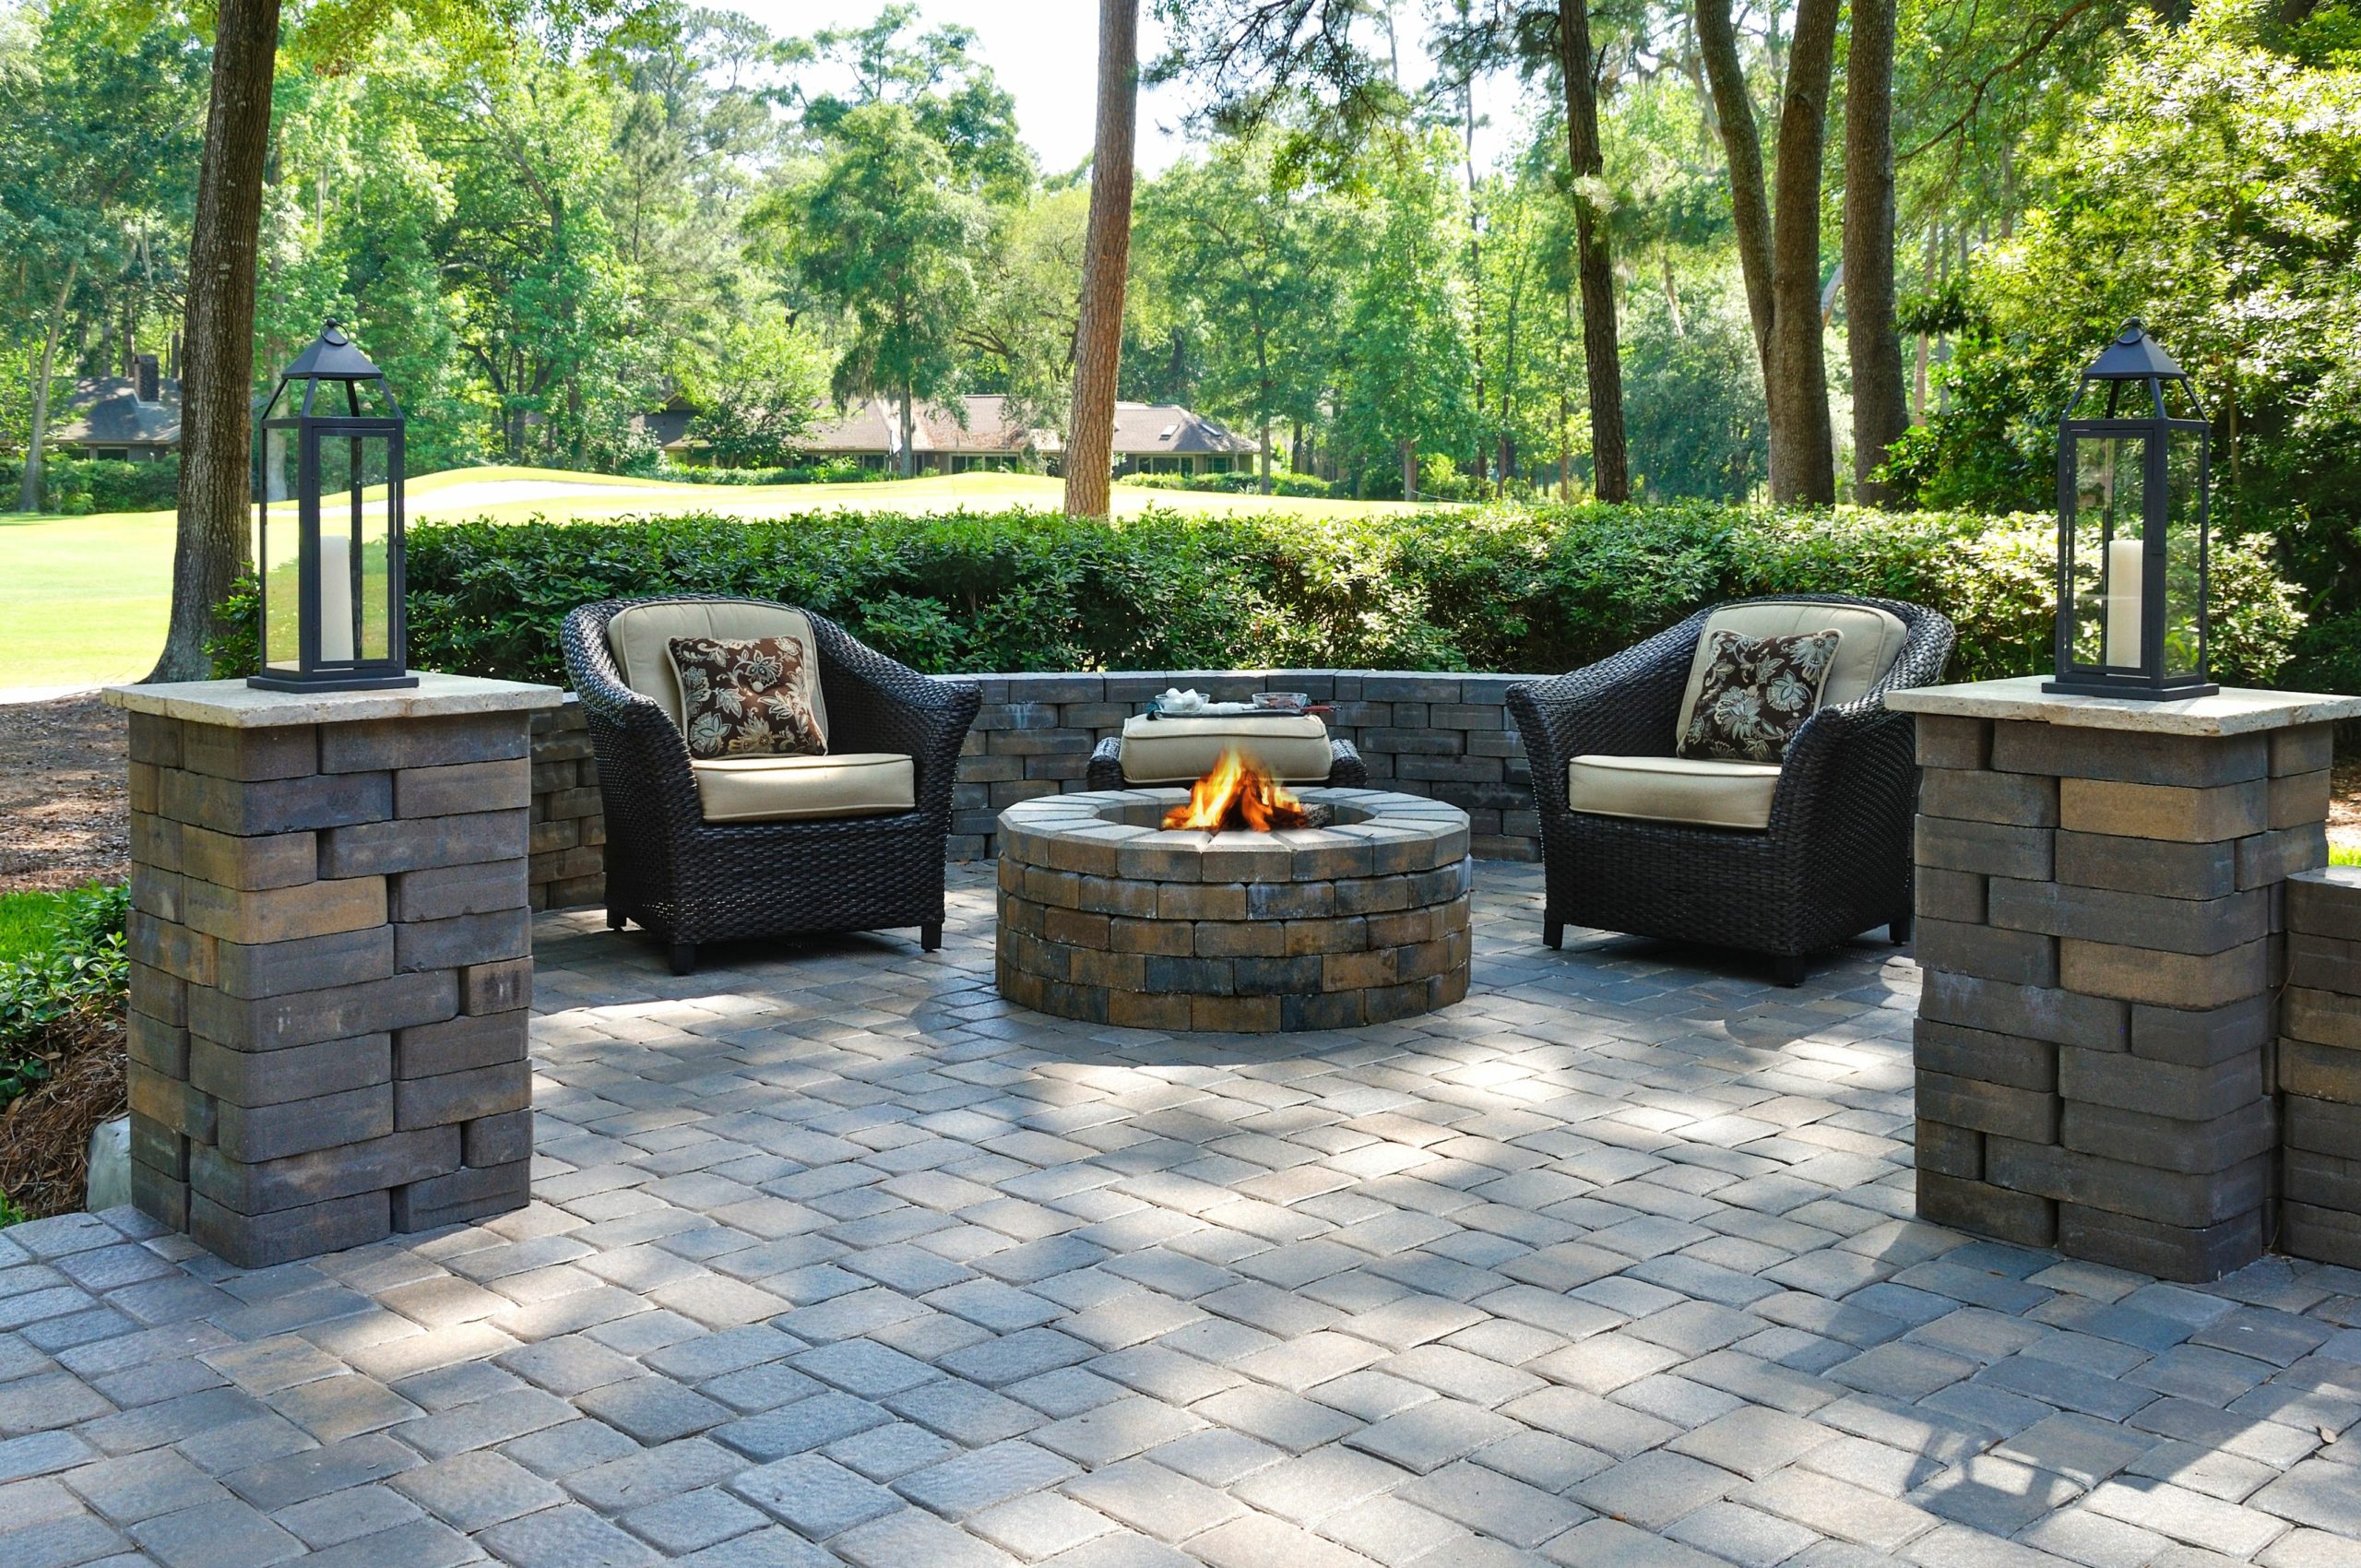 Beautiful outdoors pavers with two comfortable armchairs and a f